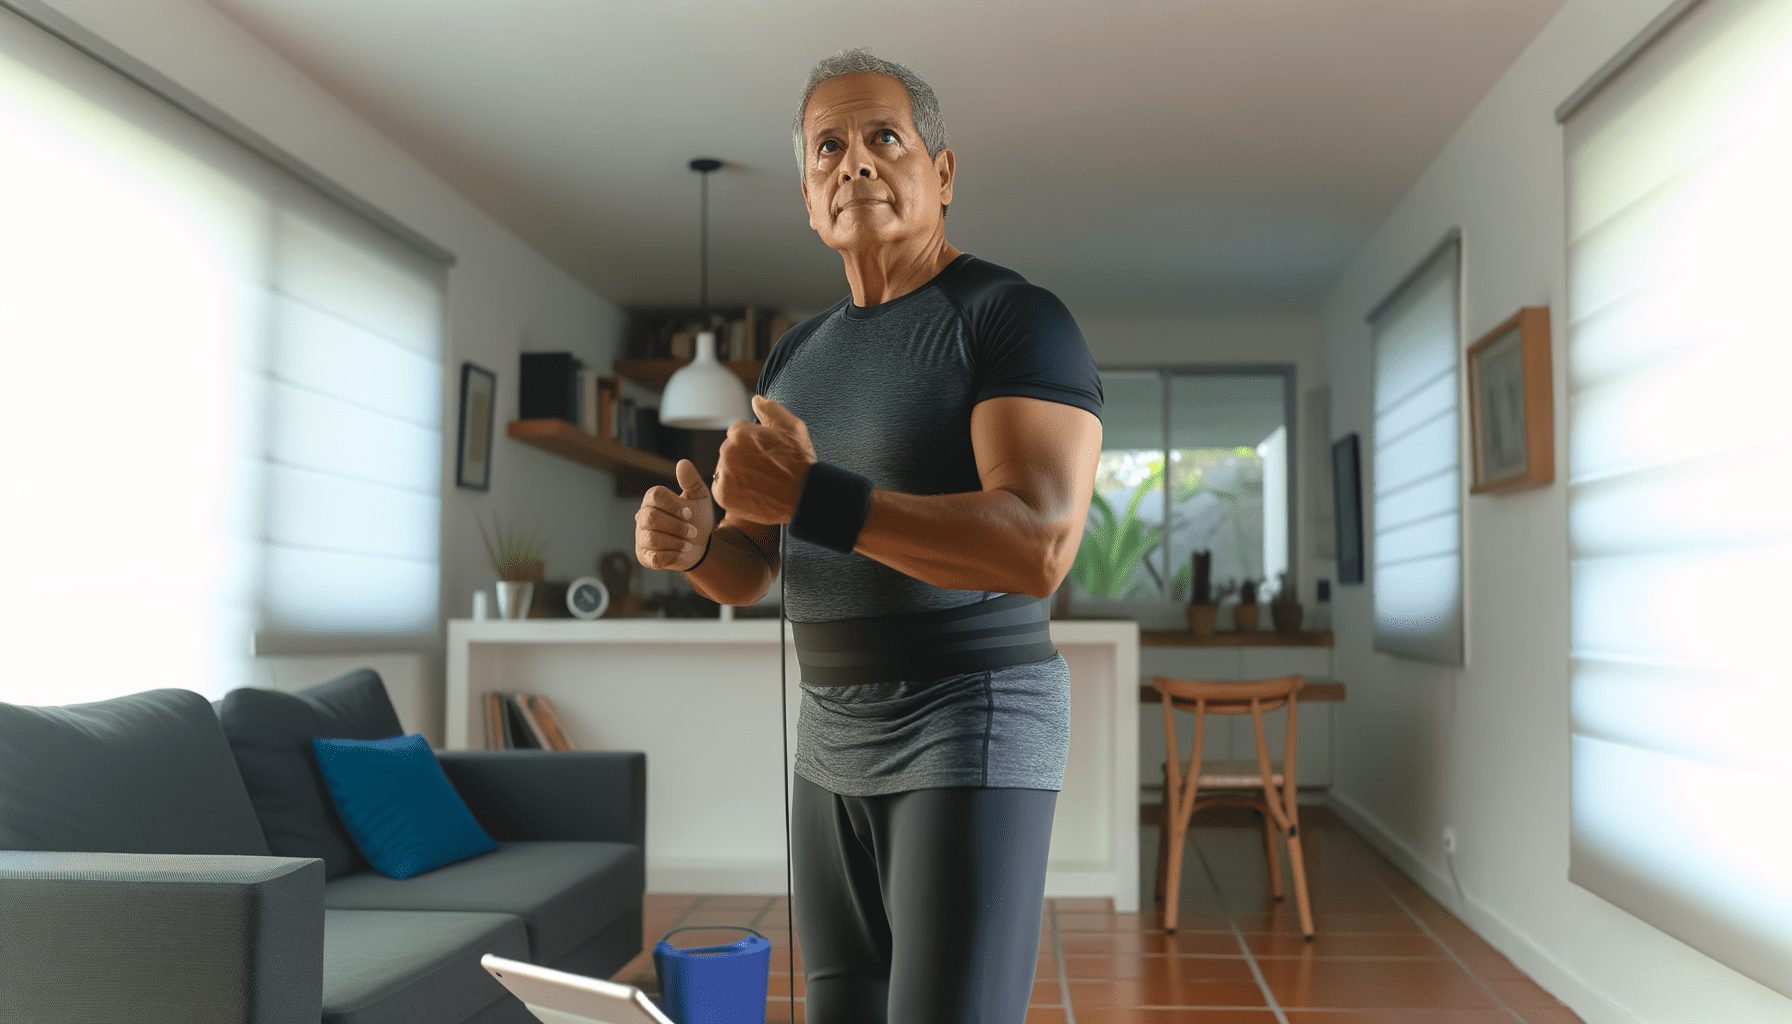 From Couch to Confident: Home Workout Plans for Senior Fitness